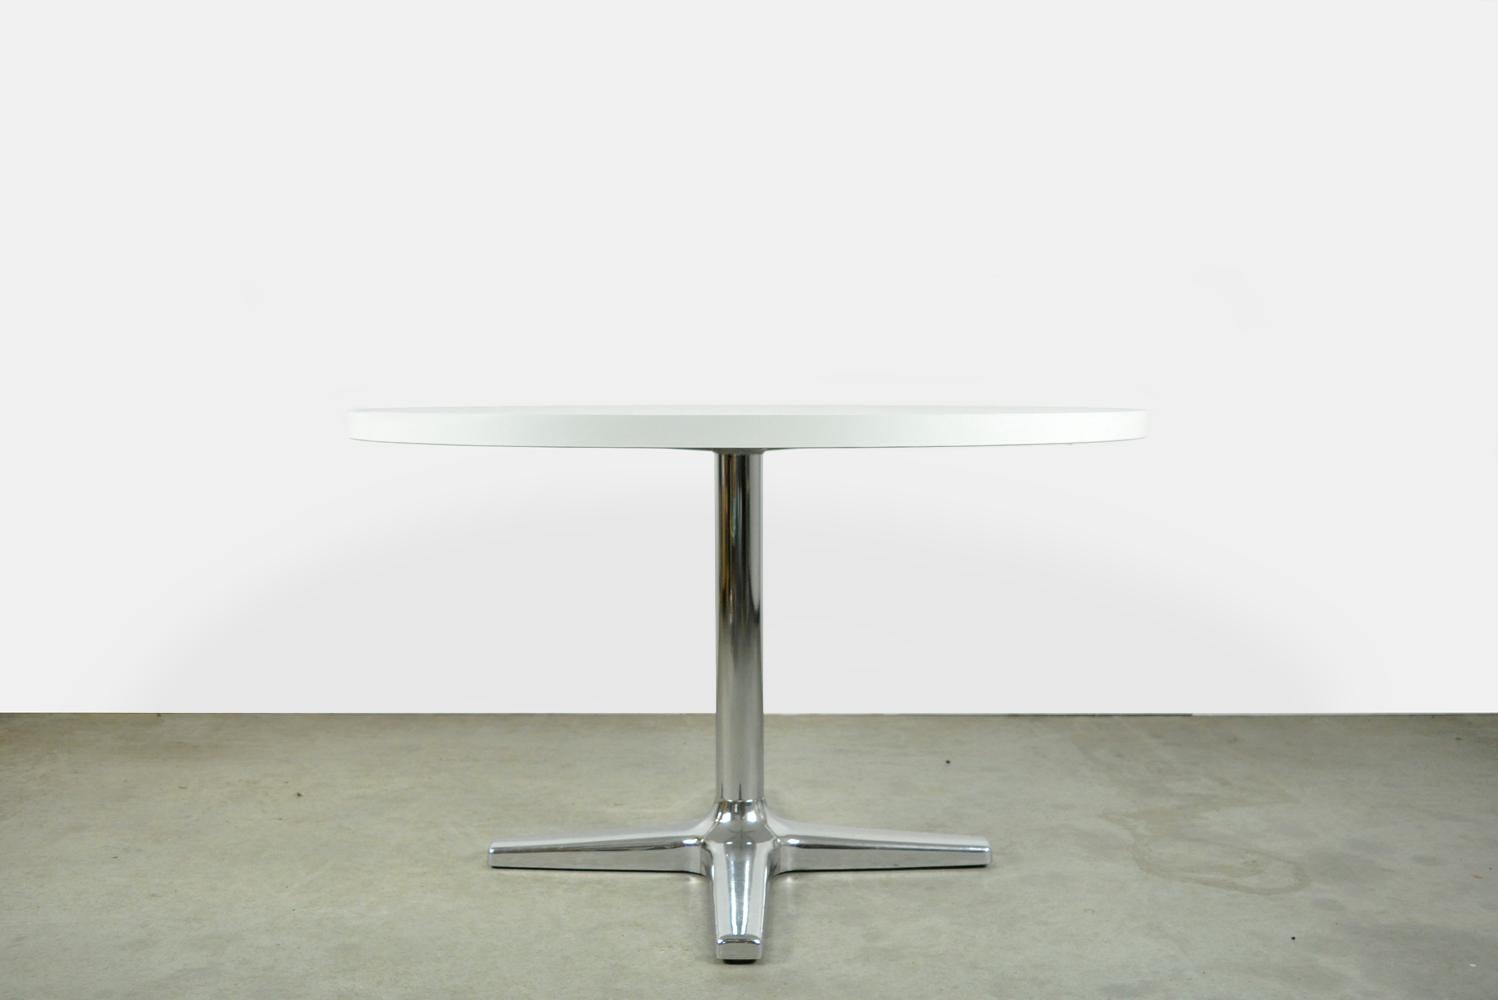 round dining table for 4-5 people attributed to Pastoe, 1970s. Round table top with white smooth melamine/formica finish, chrome leg and chrome-plated cast iron star base. Table is not marked. Beautiful set together with the Pastoe chairs by Pierre